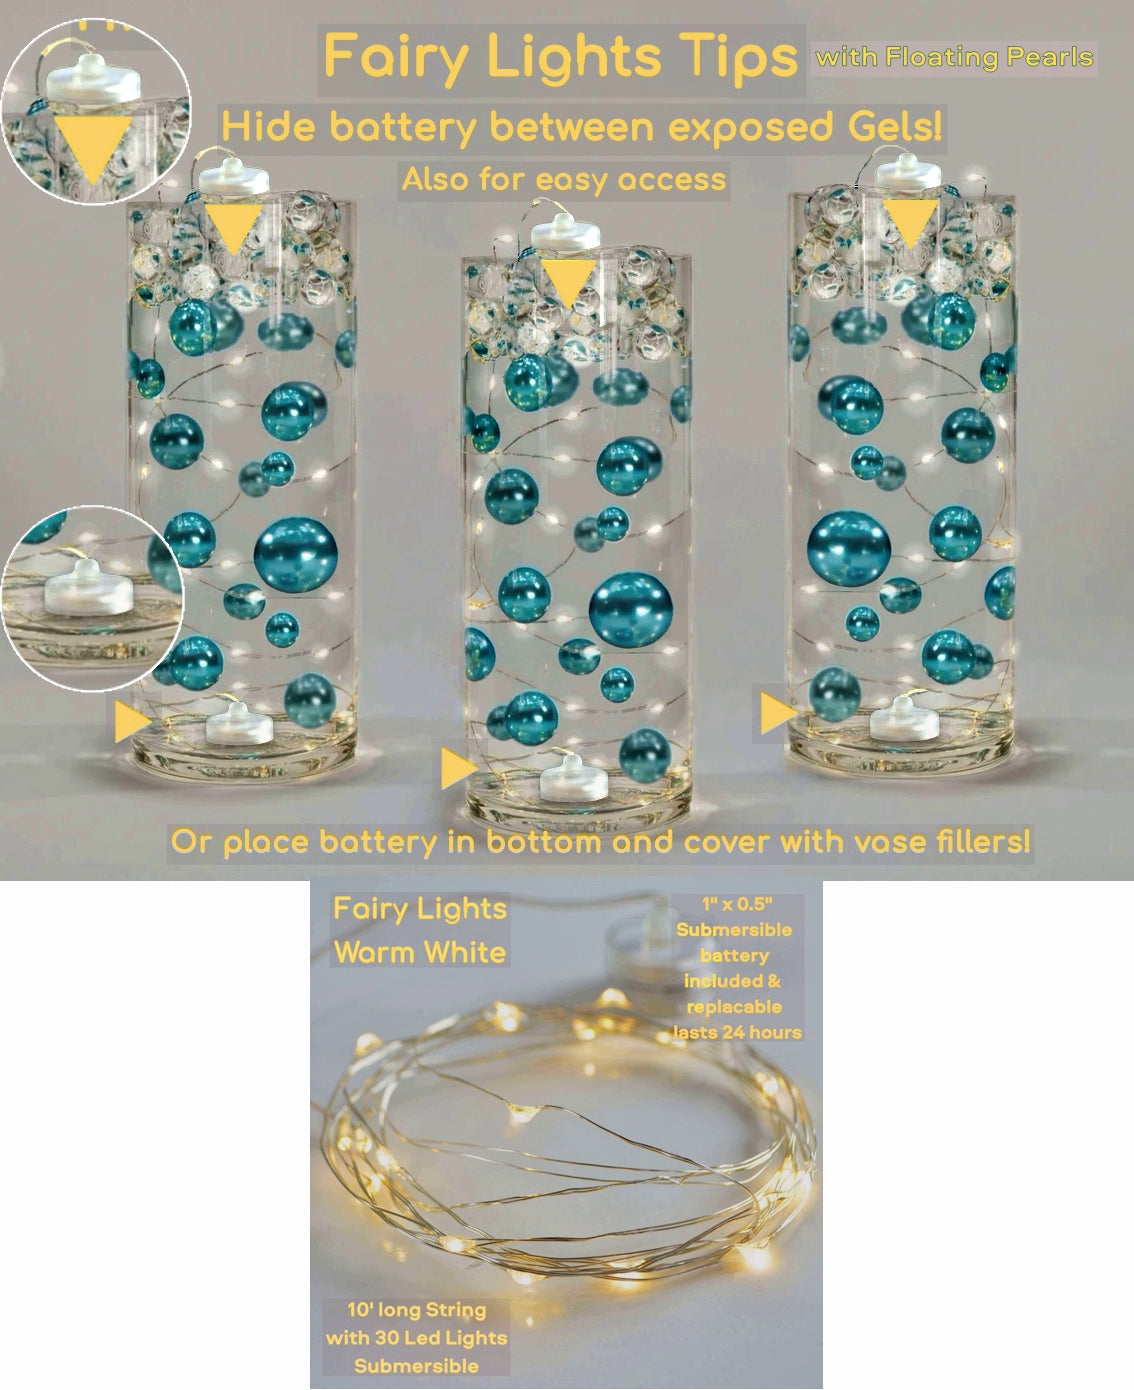 50 Floating Glowing Pumpkin Gems & Pearls-Fall Thanksgiving-1 Pk Fills 1 Gallon of Gels for the Floating Effect for Your Vase-With Transparent Gels Measured Floating Kit-Option: 3 Fairy Lights-Vase Decorations